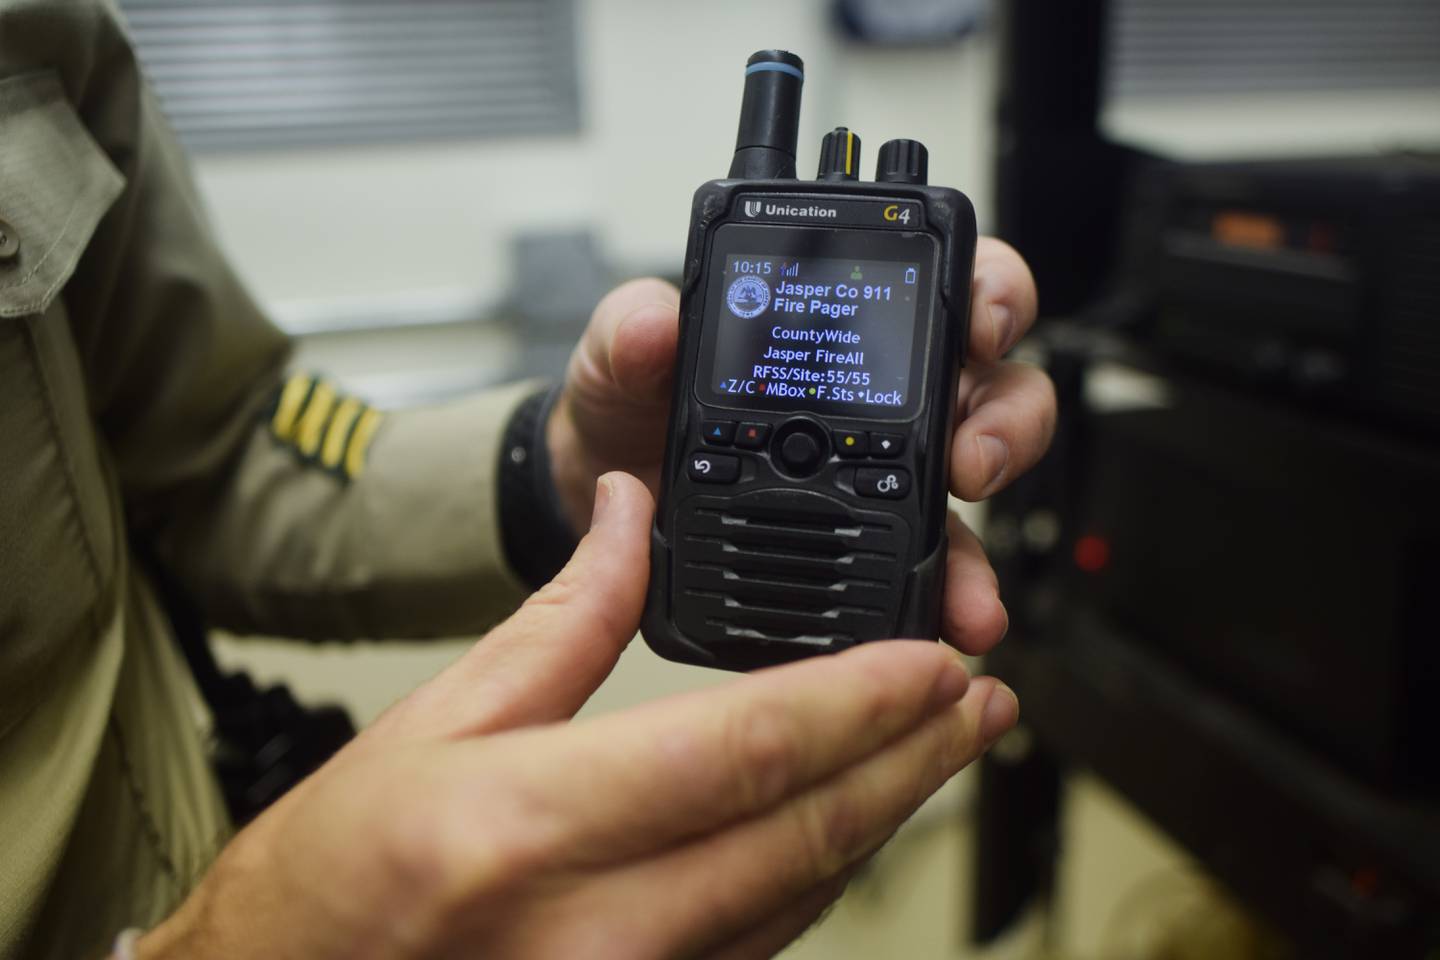 Lt. Brad Shutts of the Jasper County Sheriff's Office showcases Unication G4 Pager used by first responders. The county recently purchased 132 pagers and acquired a third radio tower, which Shutts said will improve communications and create redundancies in case of natural disasters.